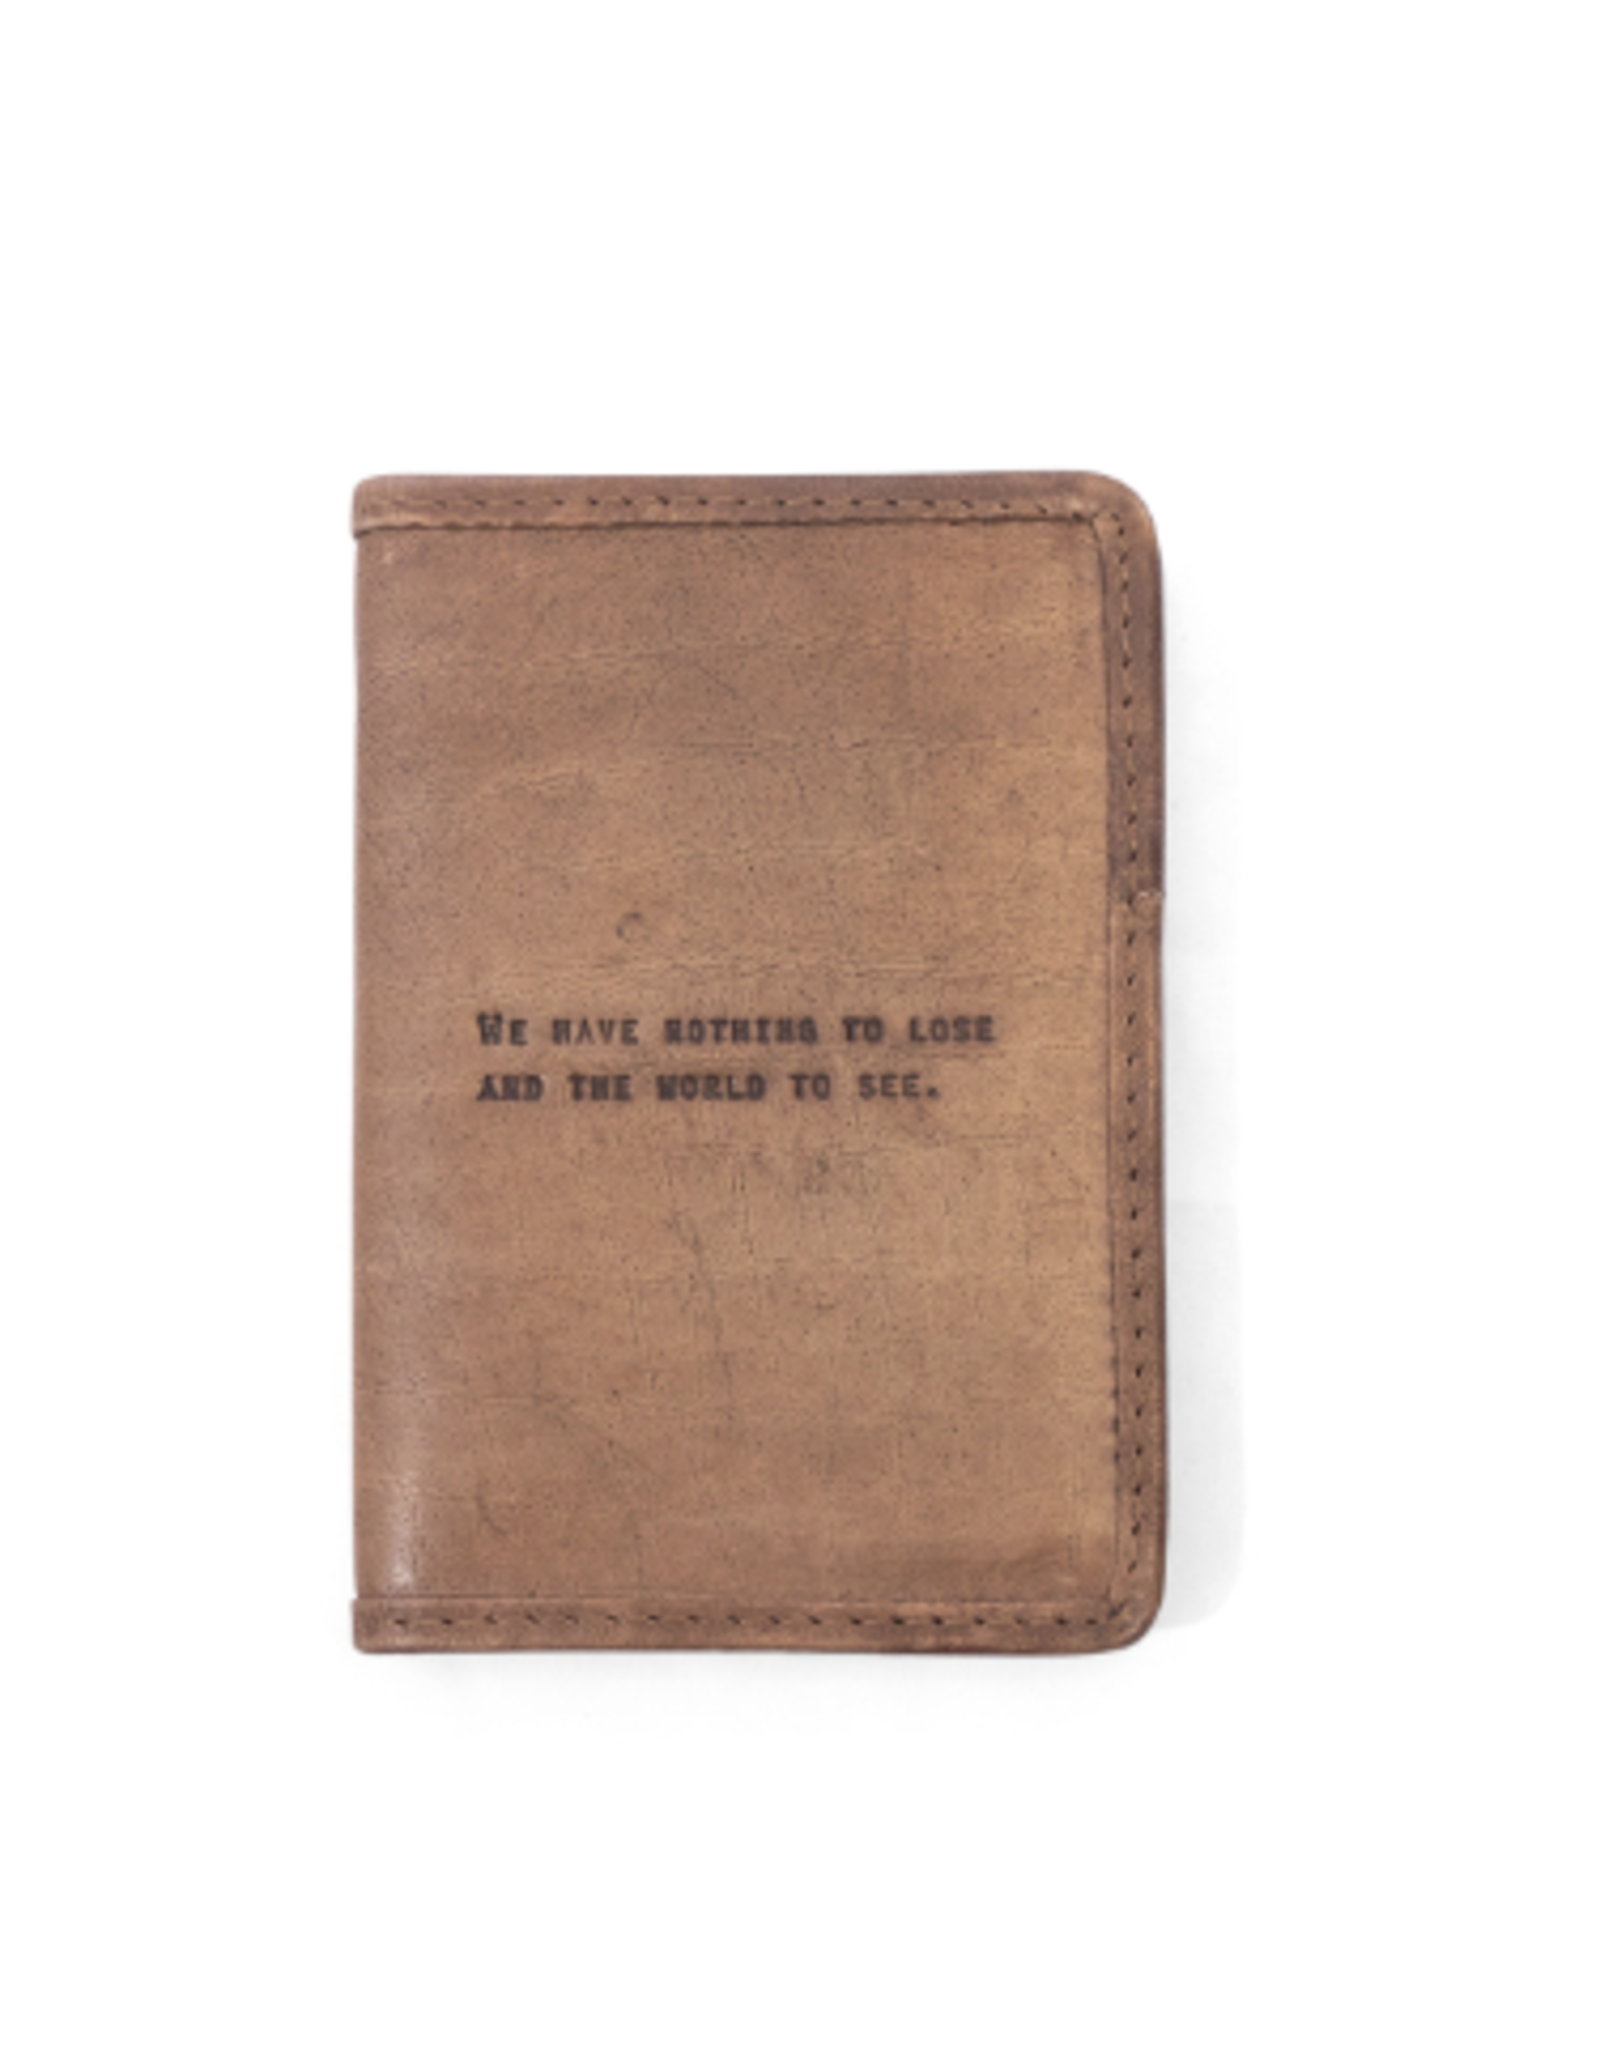 Sugarboo & Co Leather Passport Cover, We Have Nothing To Lose